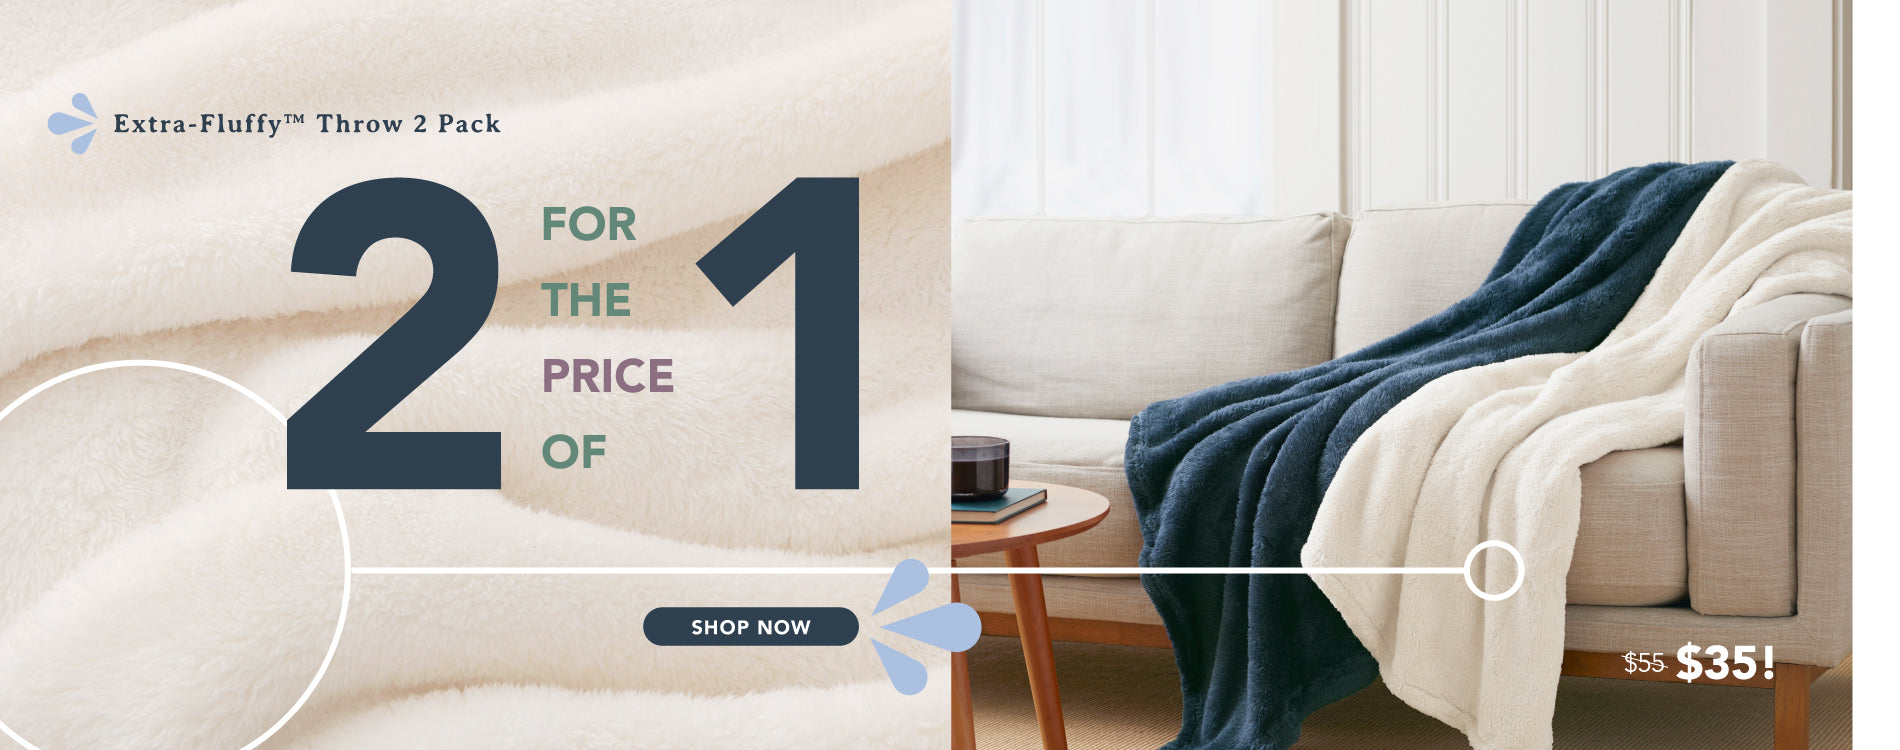 Enjoy our Extra-Fluffy Throw 2 Pack for $35, two for the price of one for a limited time only!